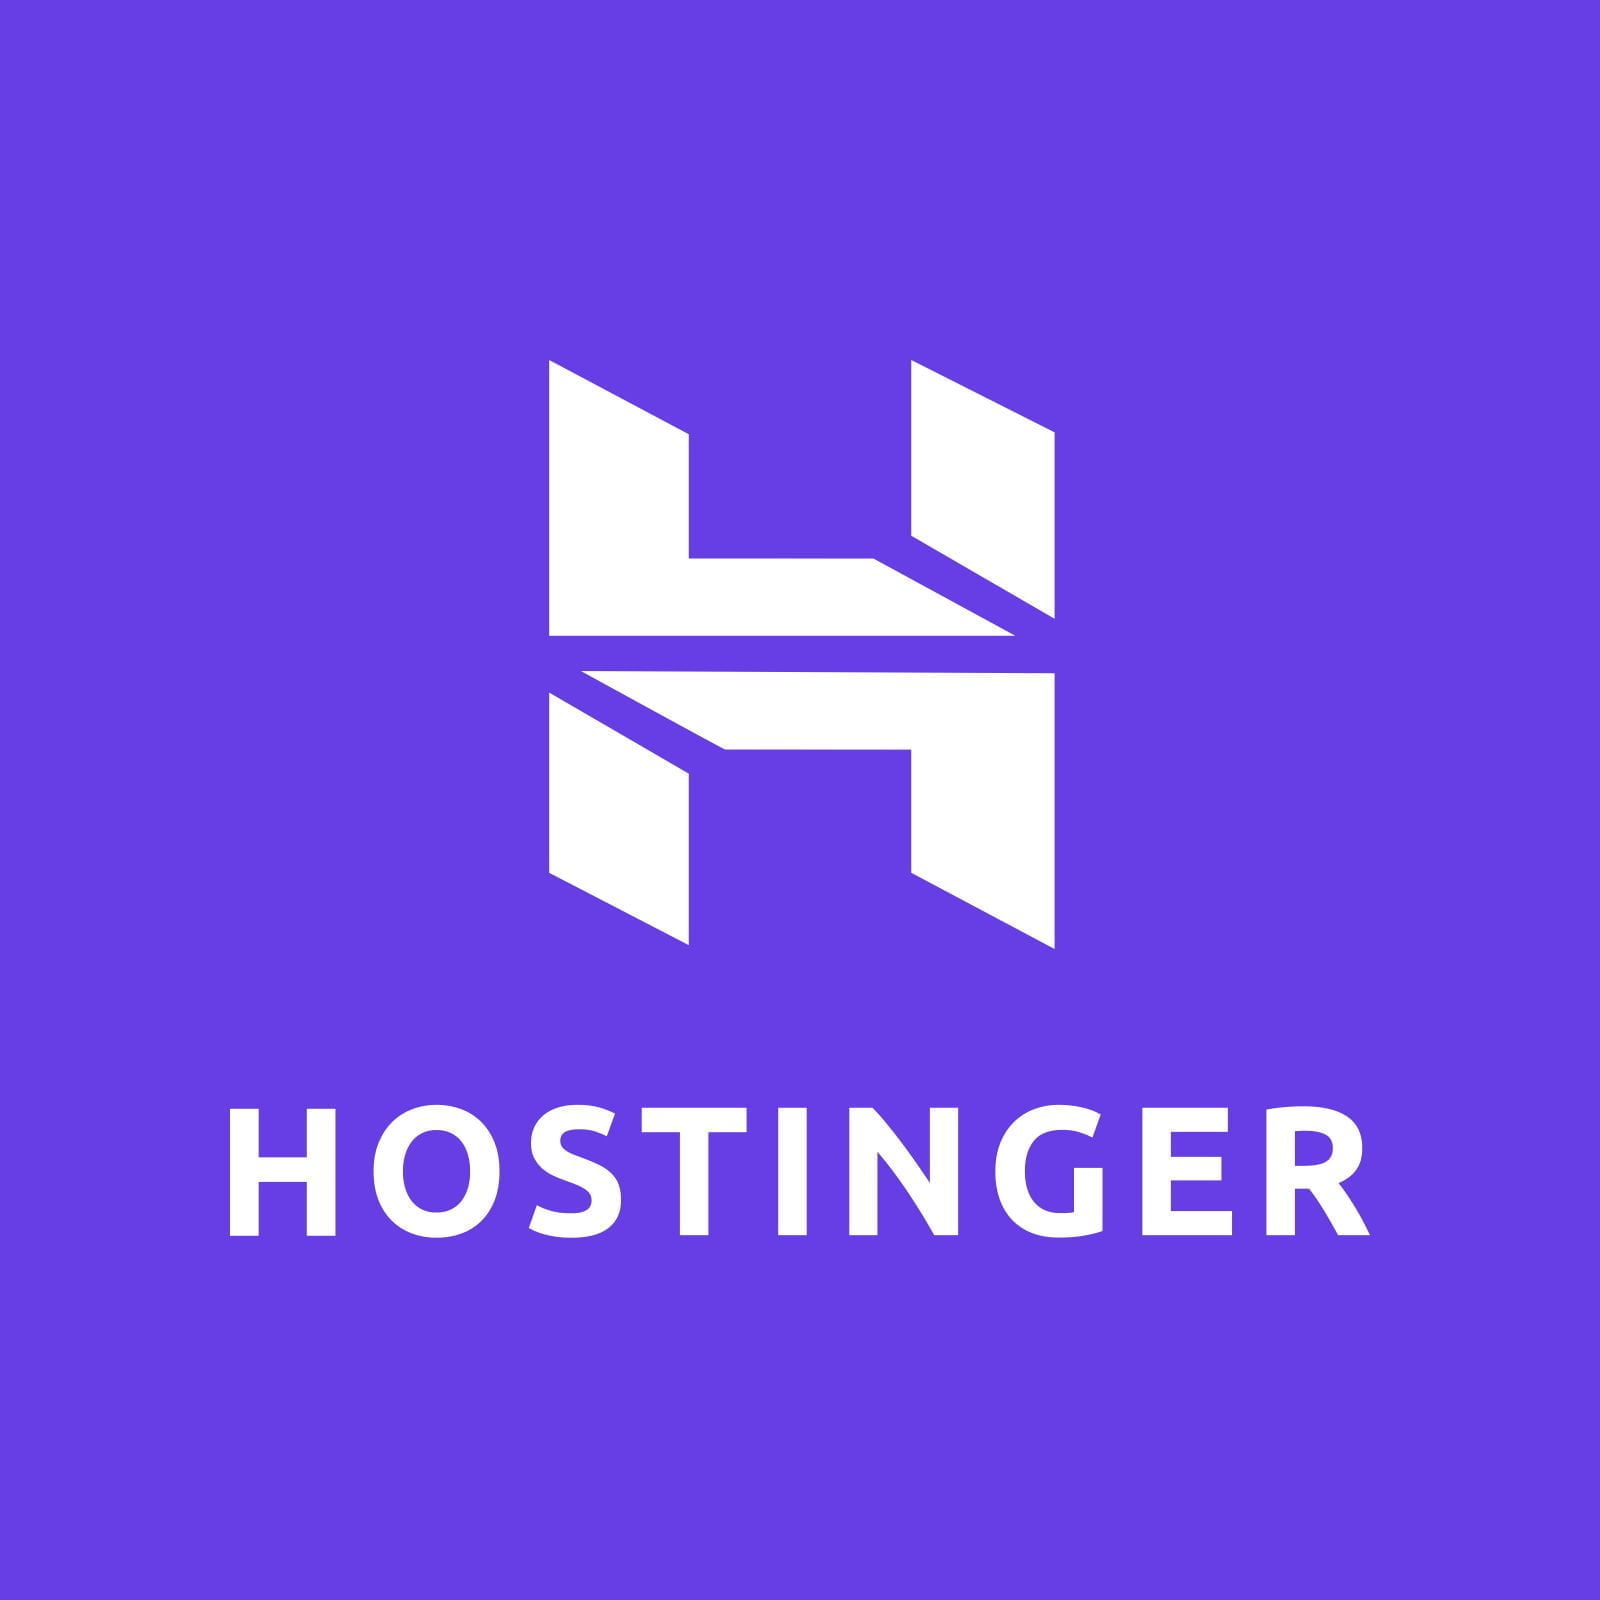 You are currently viewing Hostinger: quality web hosting at very low prices